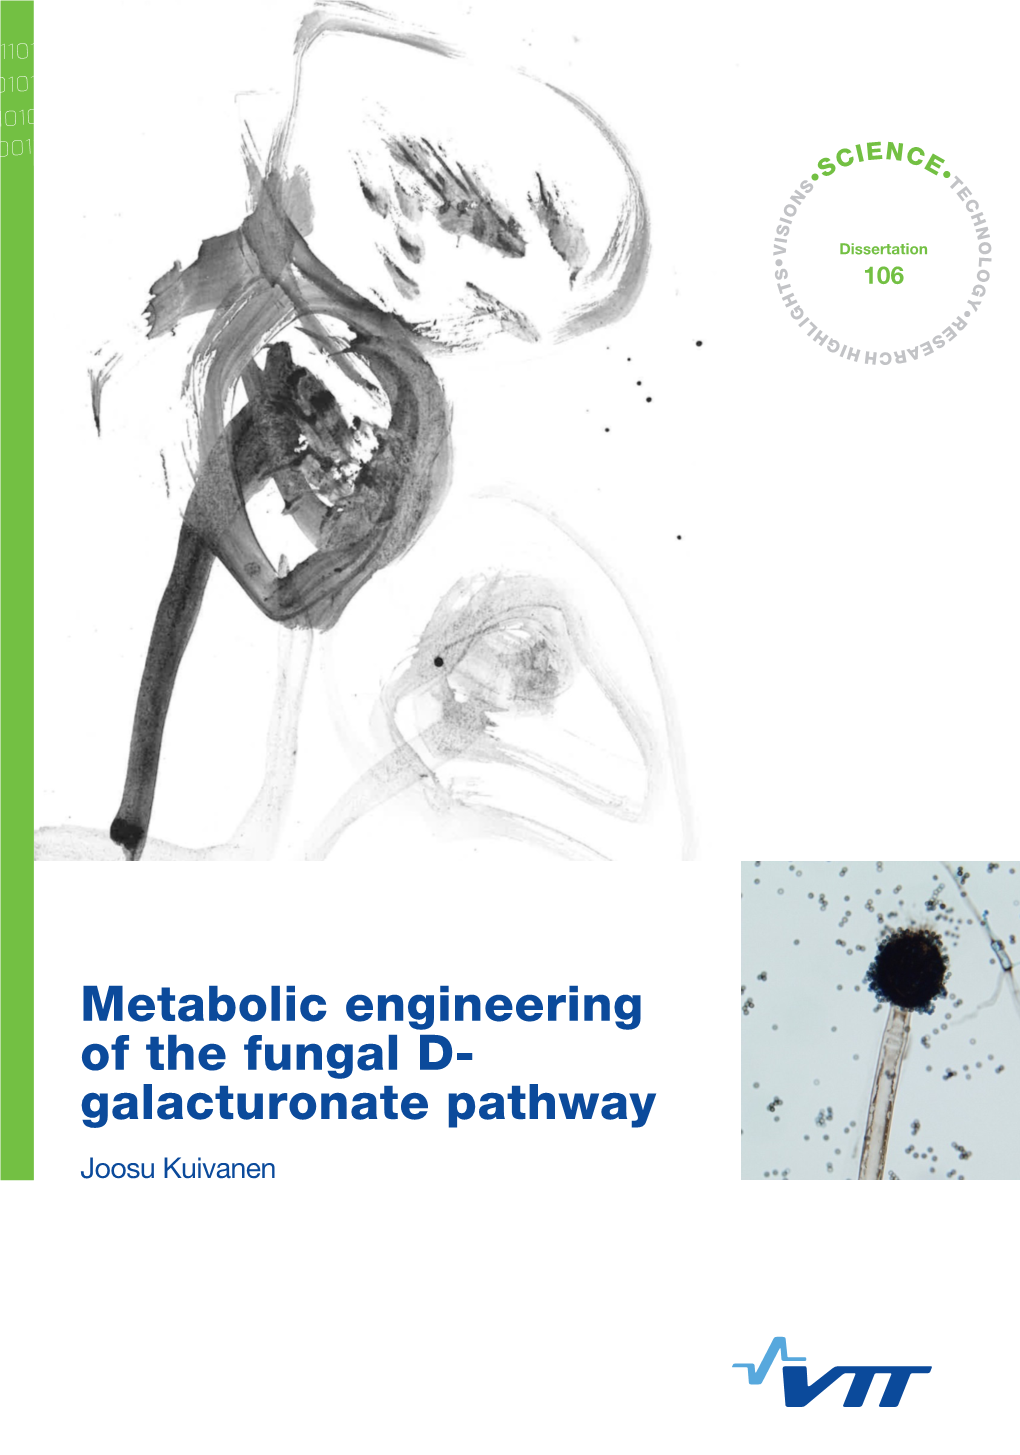 Metabolic Engineering of the Fungal D- Galacturonate Pathway